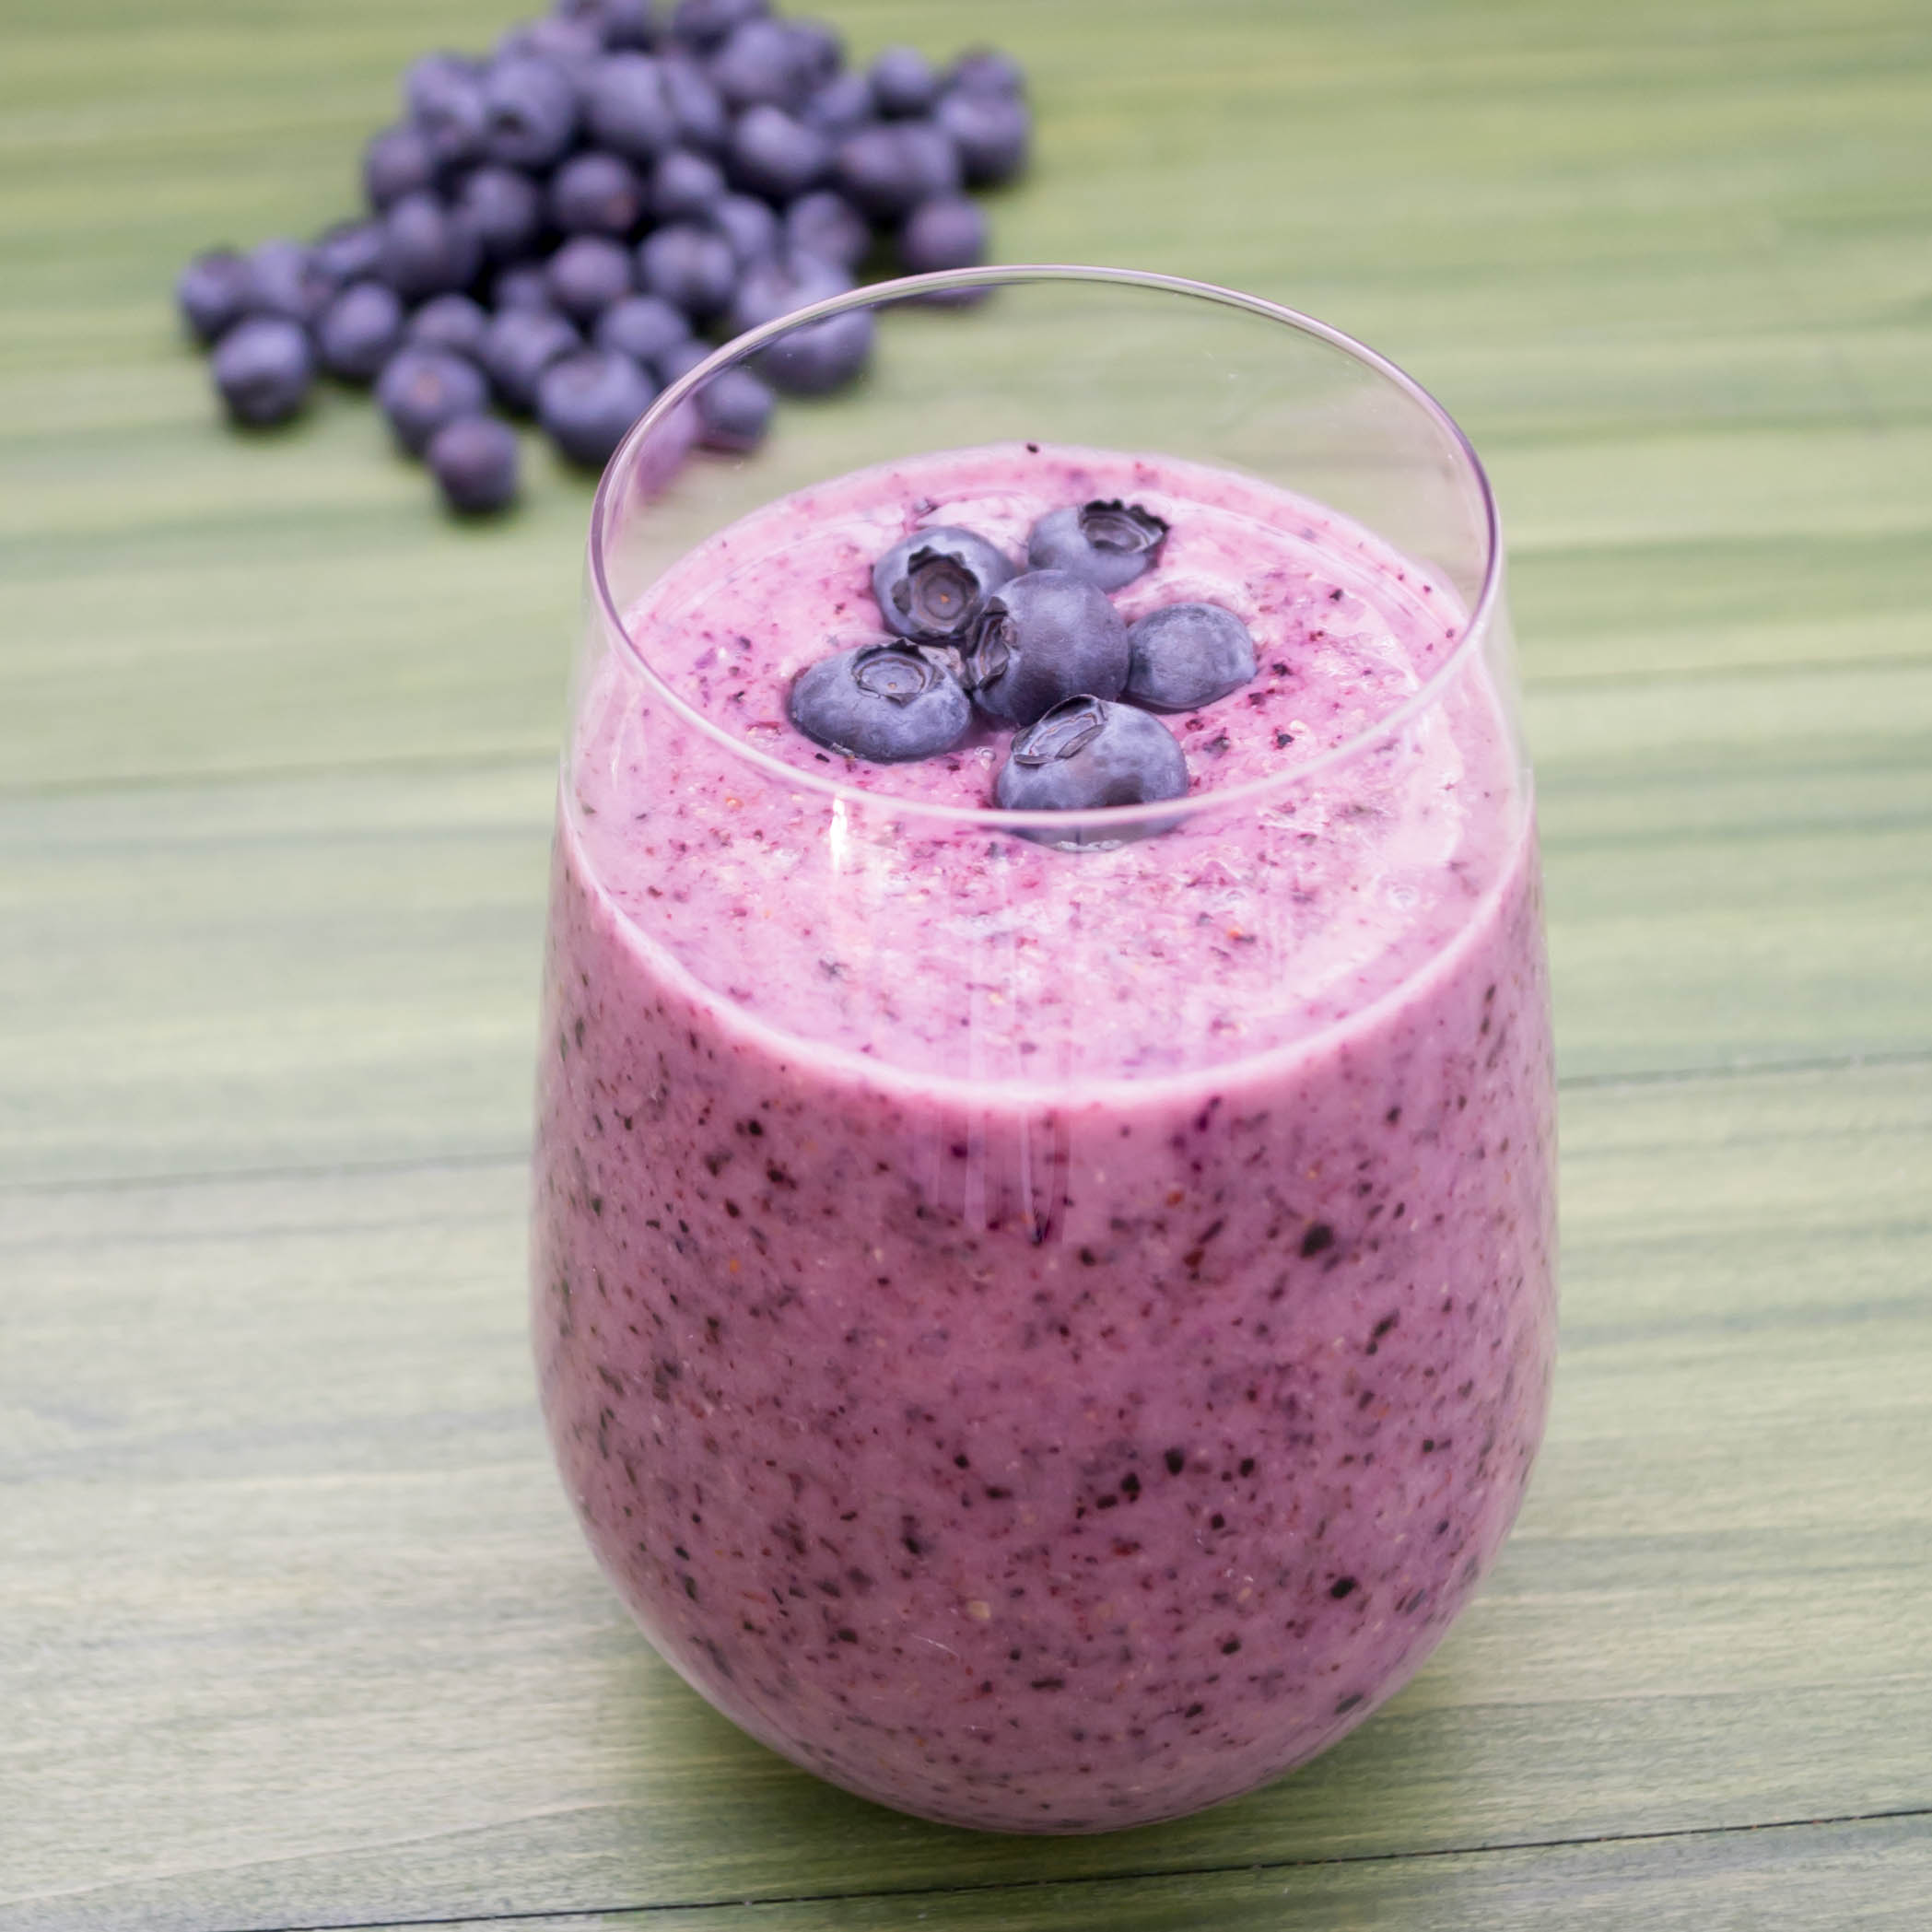 Blueberry Pineapple Smoothie | Pick Fresh Foods